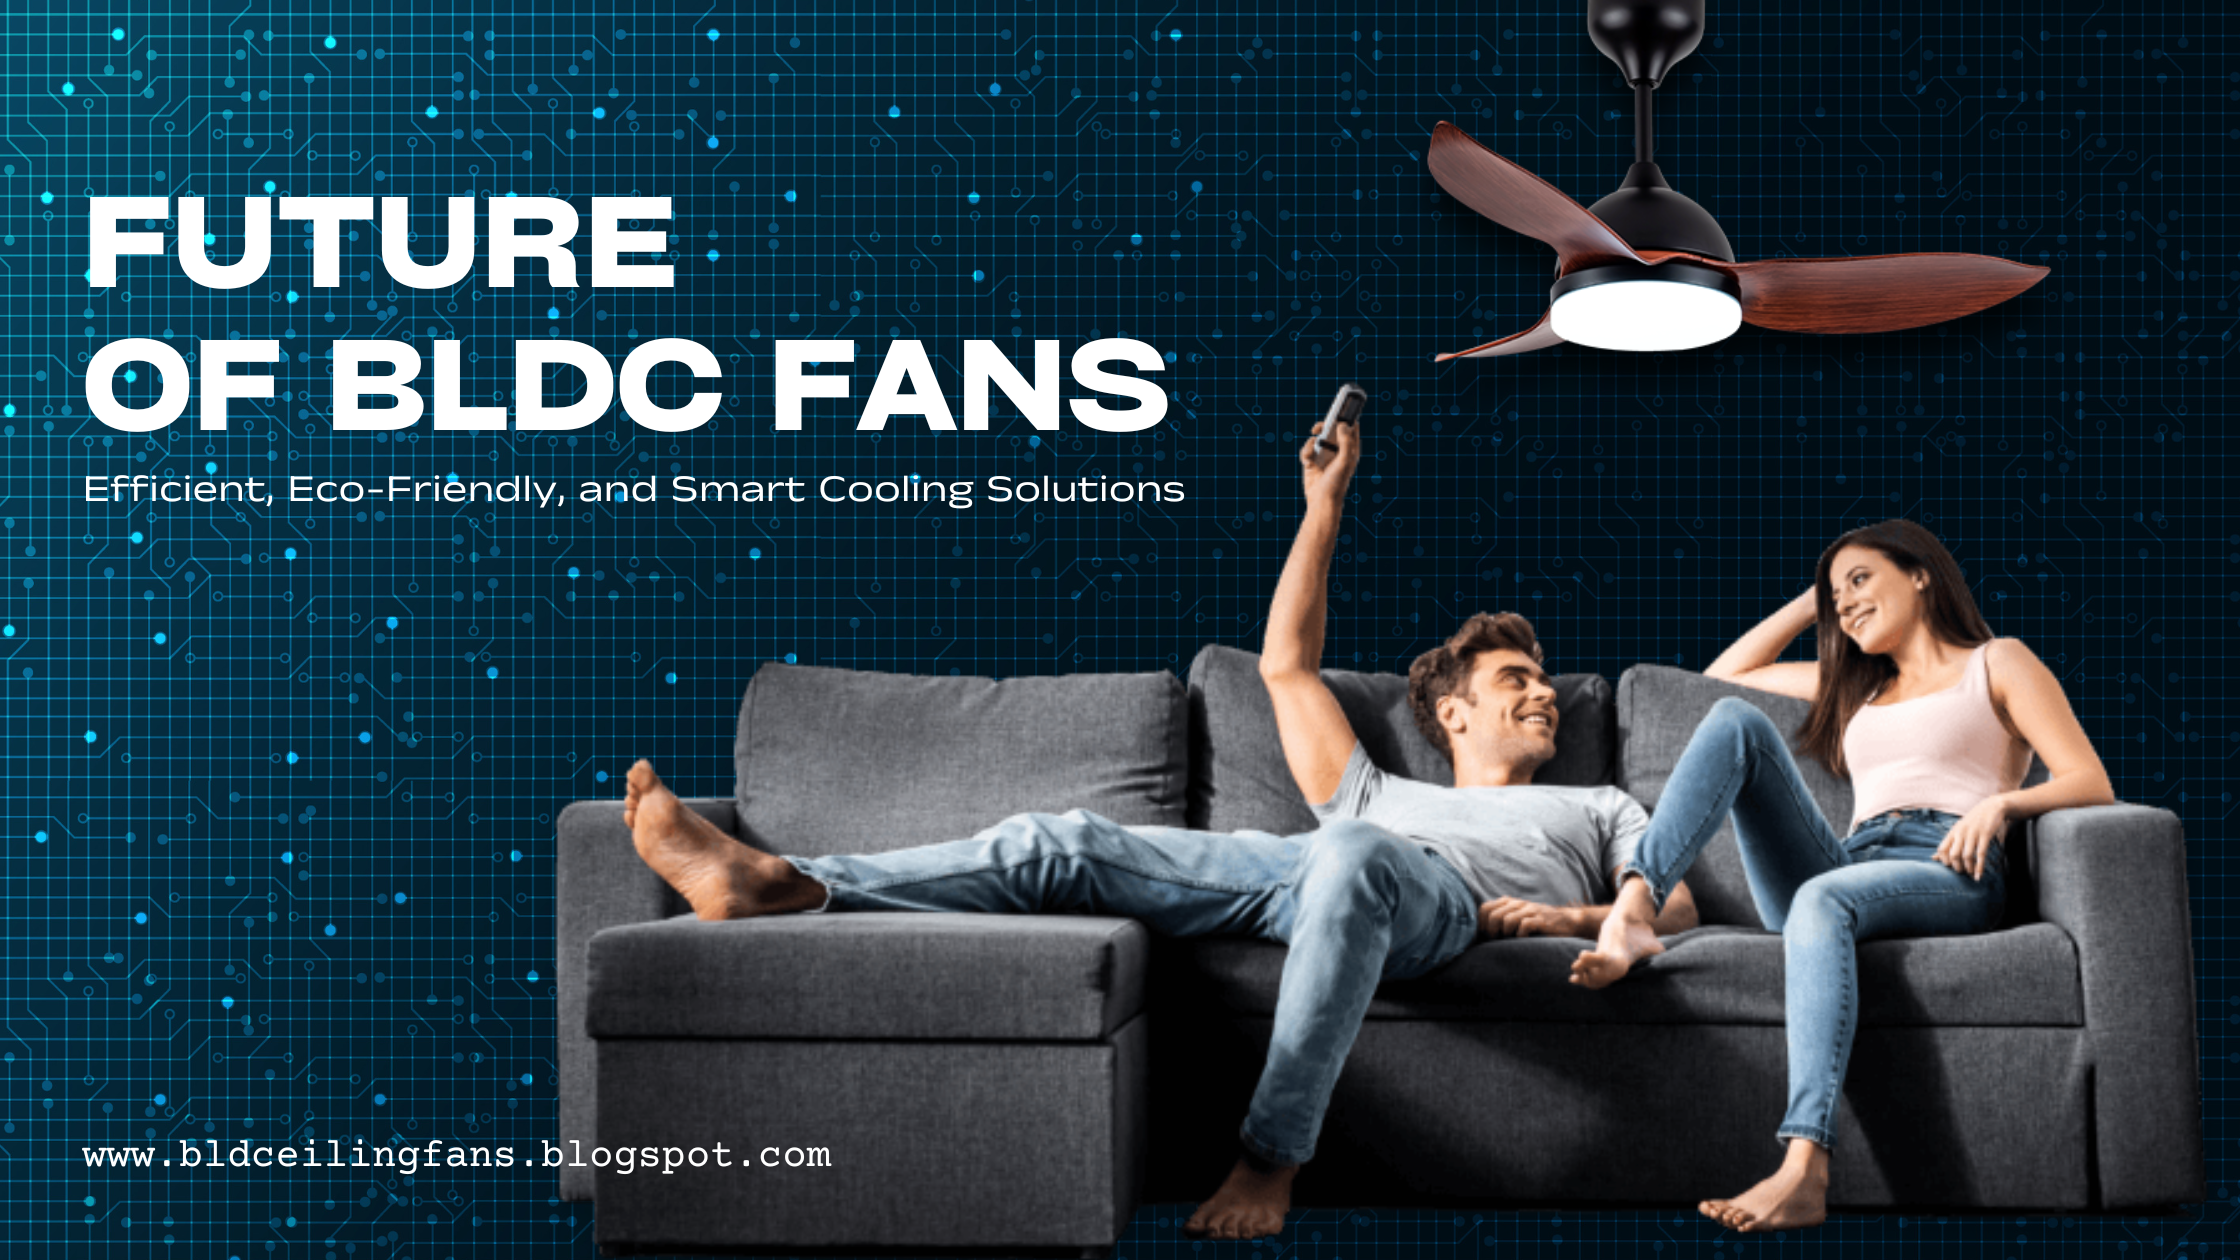 BLDC Fans: The Future of Ceiling Fans 2023